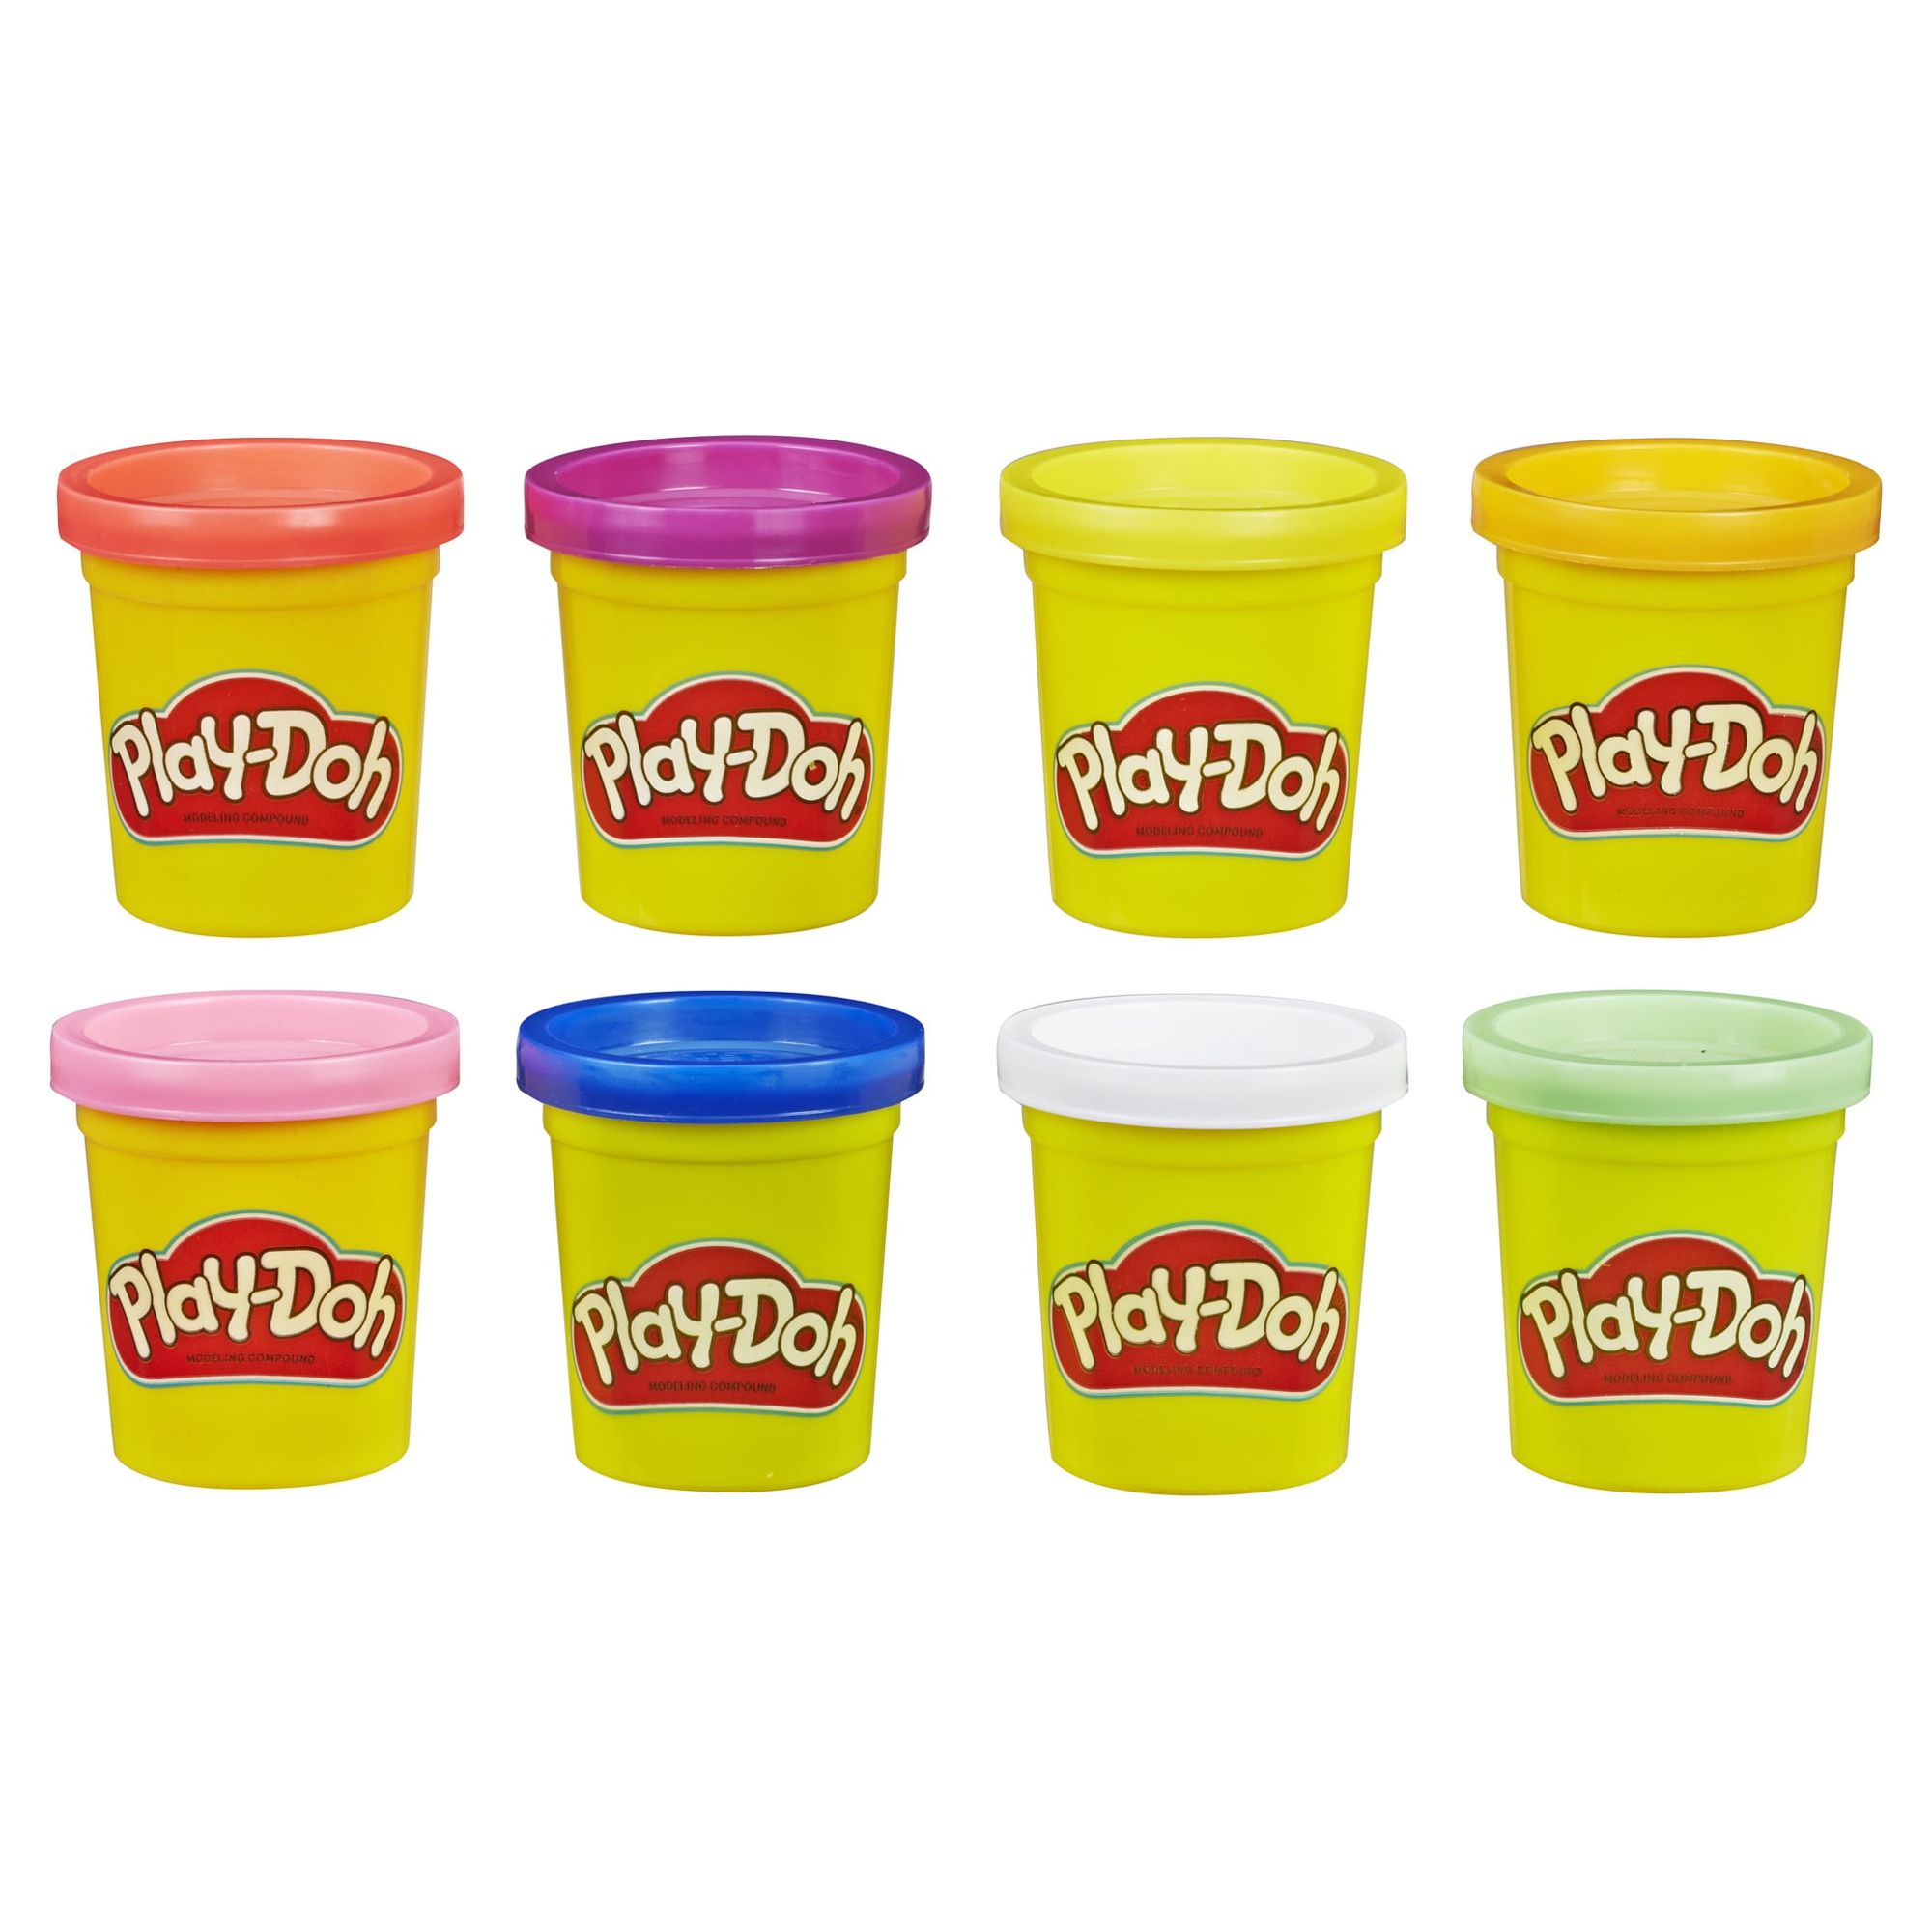 Play-Doh 8 Color Rainbow Pack 16 oz (1 of 2 color varieties) - image 2 of 4